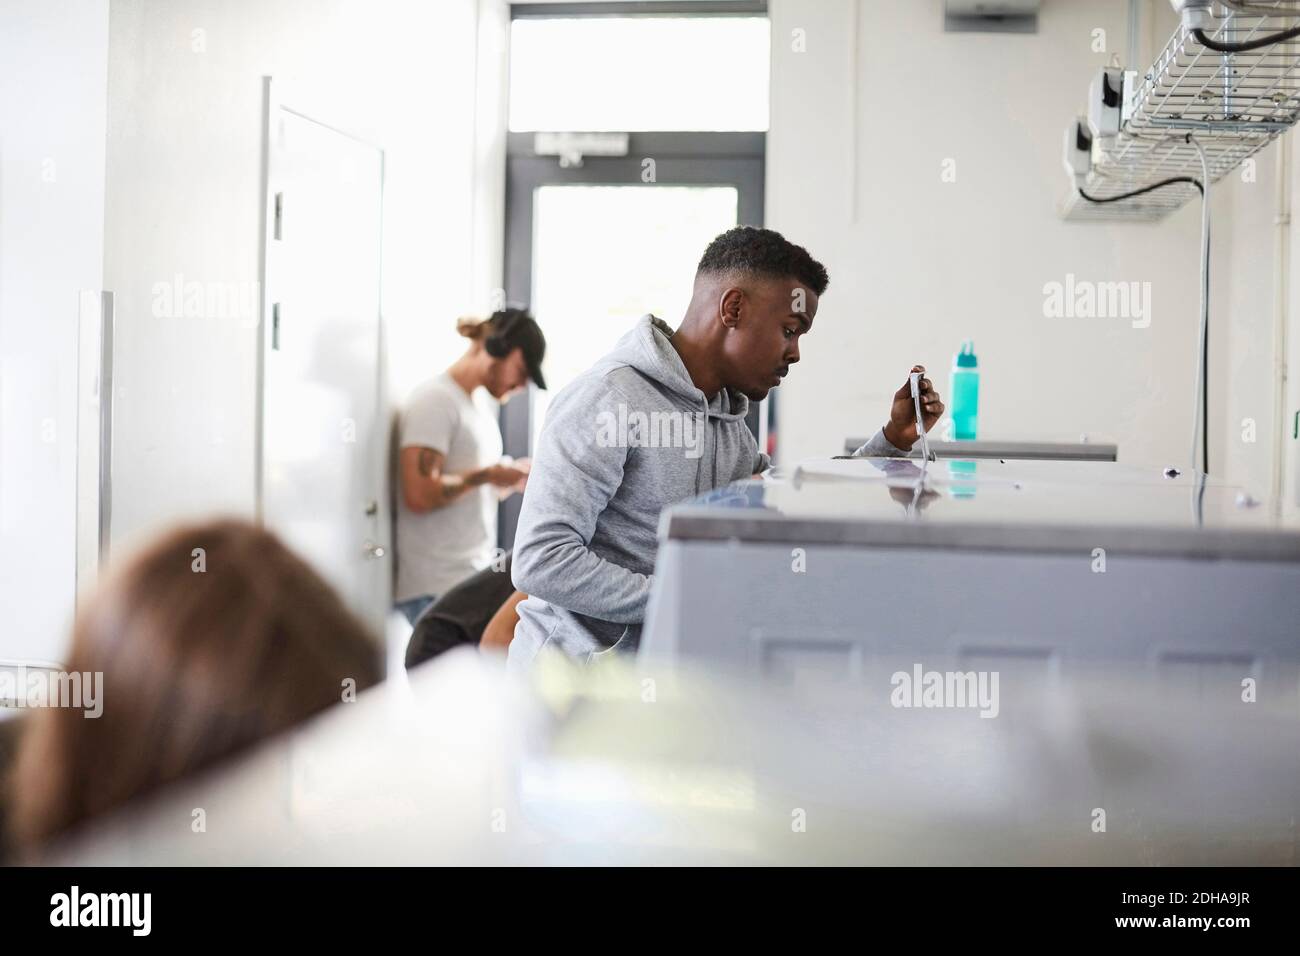 Young man using washing machine in campus laundromat Stock Photo